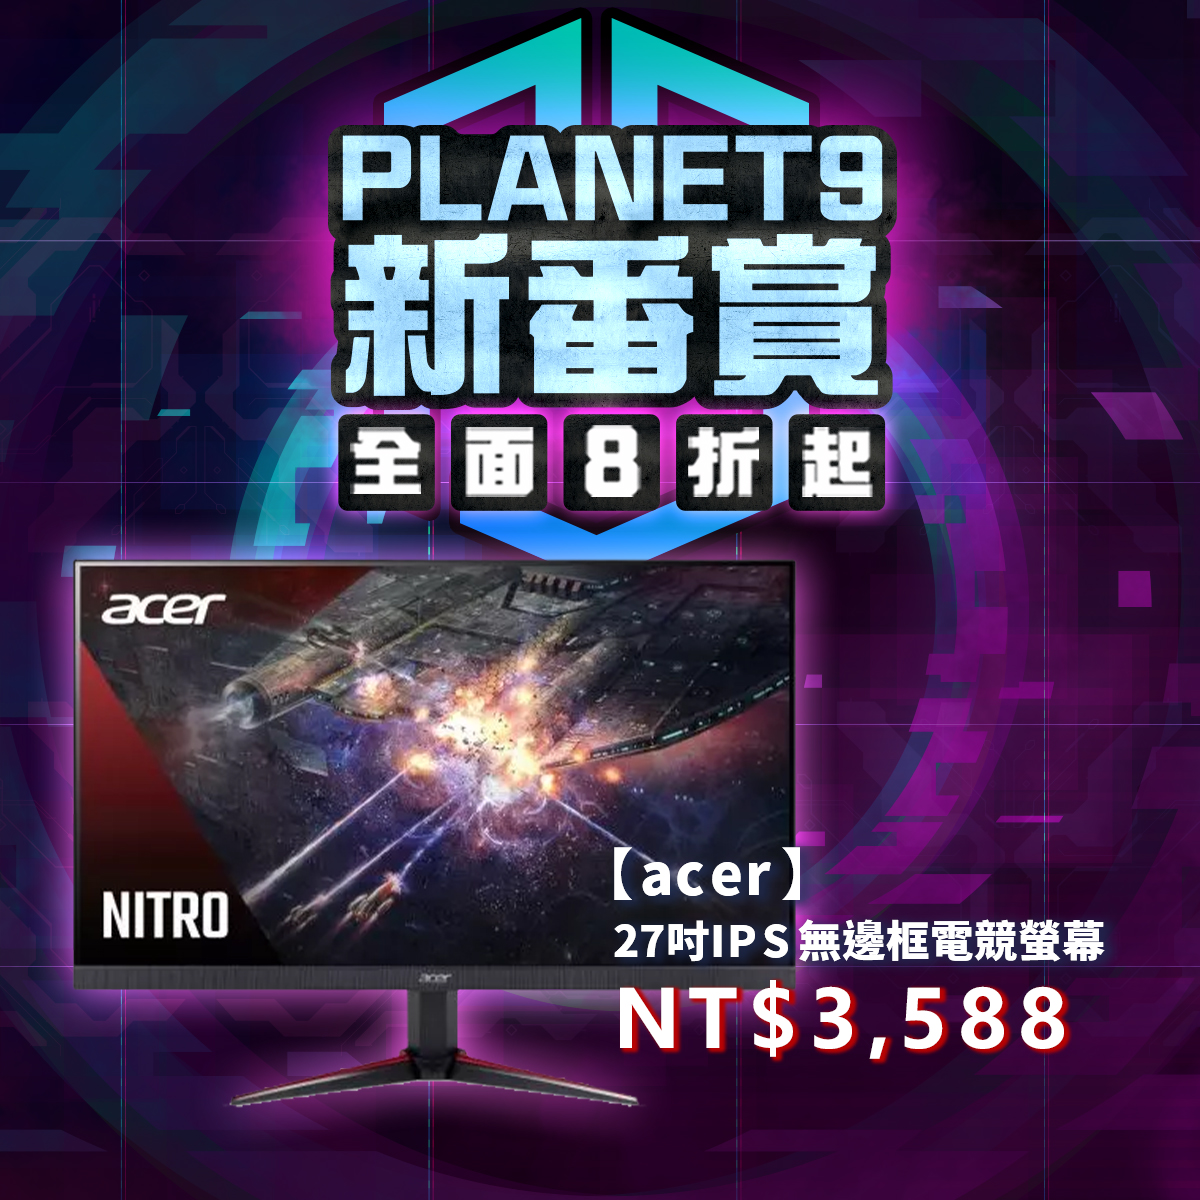 https://store.planet9.gg/TW/zh/lcd-000541.html